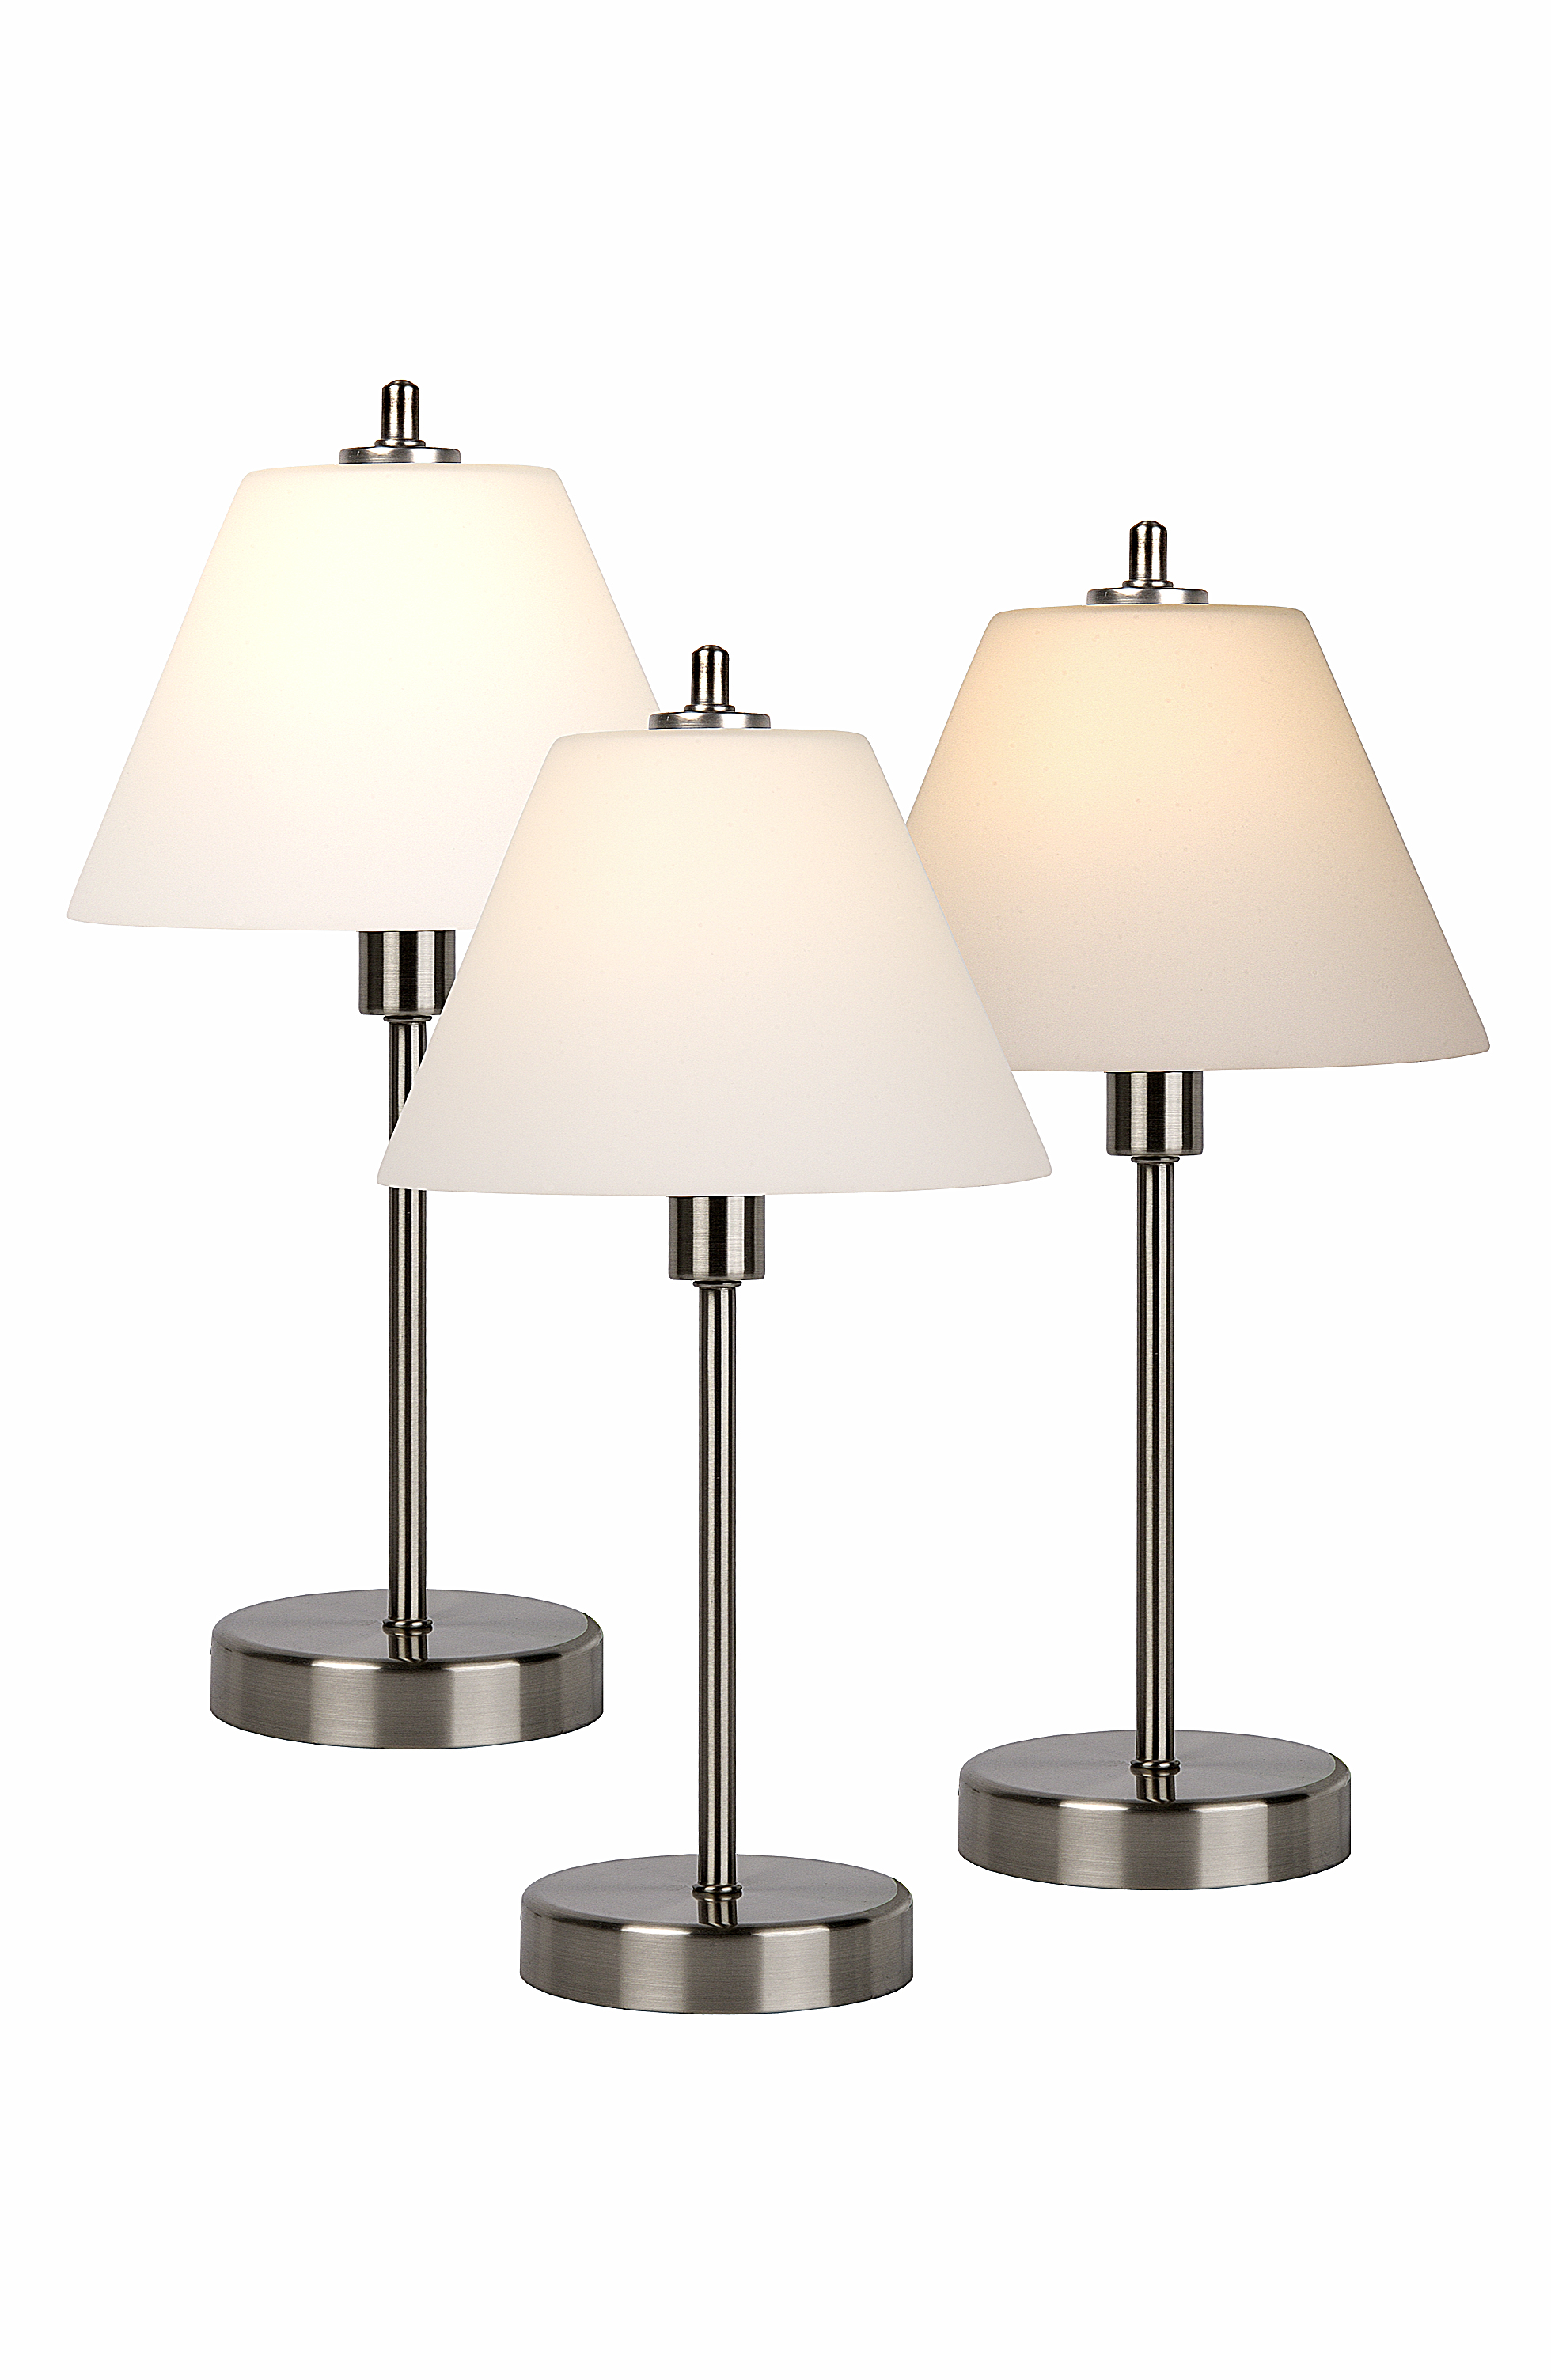 2 X TOUCH TABLE LAMP BLACK & CHROME NEW 40w 